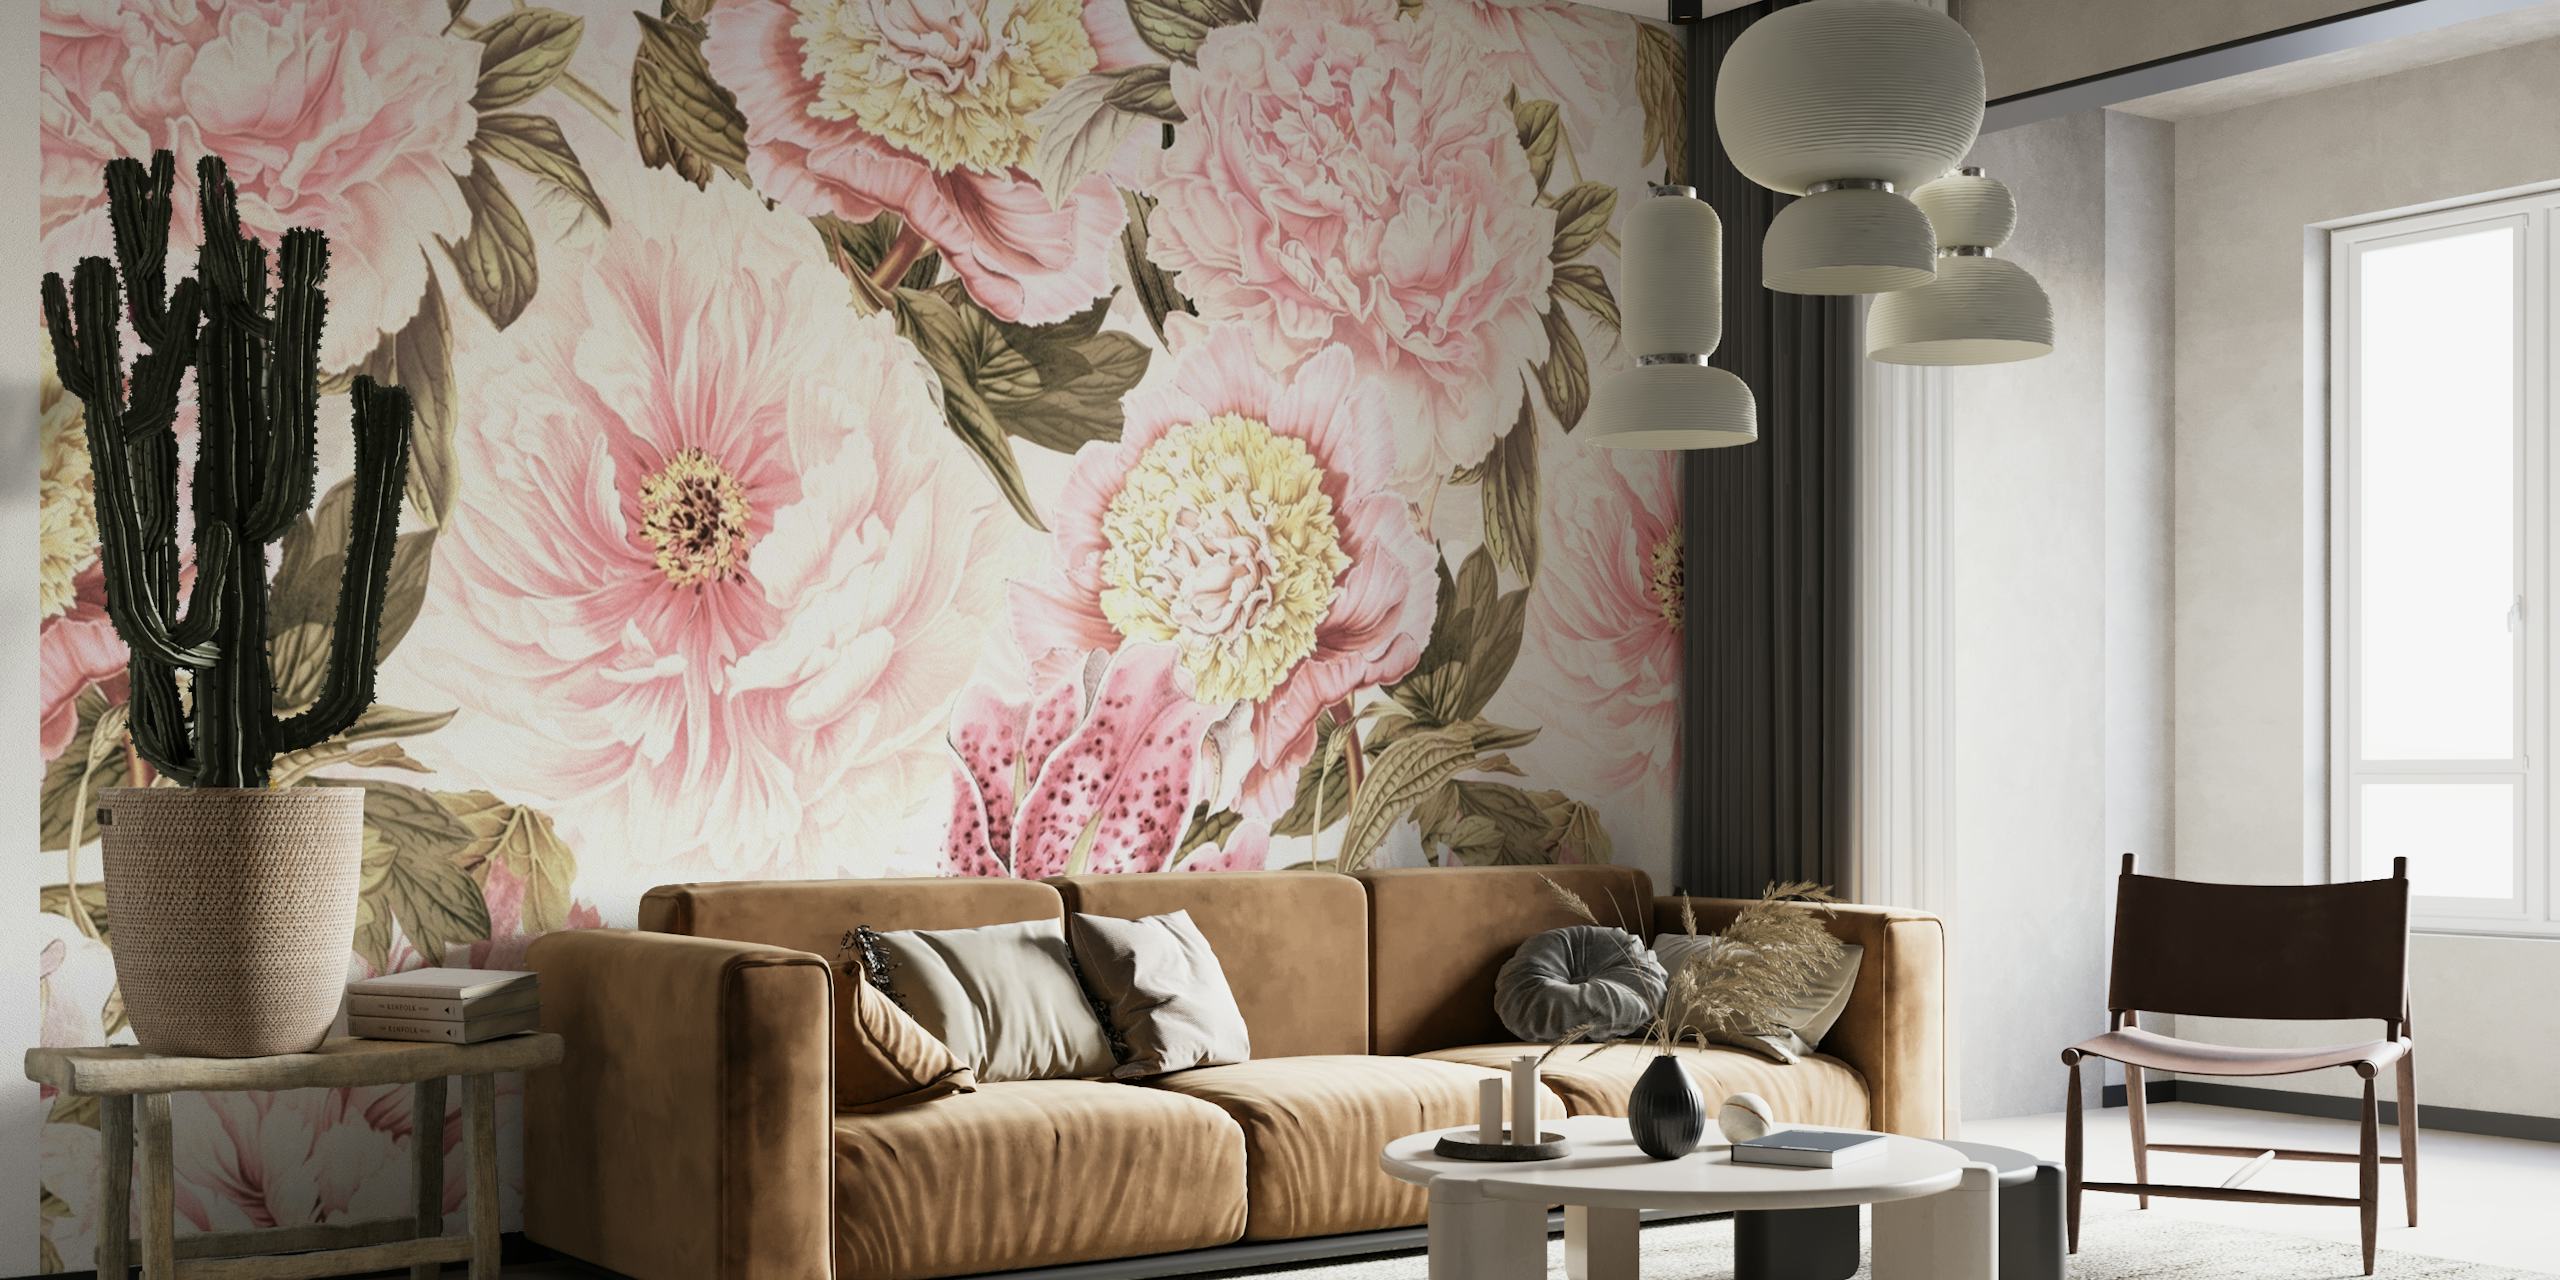 Vintage-inspired wall mural featuring baroque-style opulent peonies and lilies with a pastel color scheme.